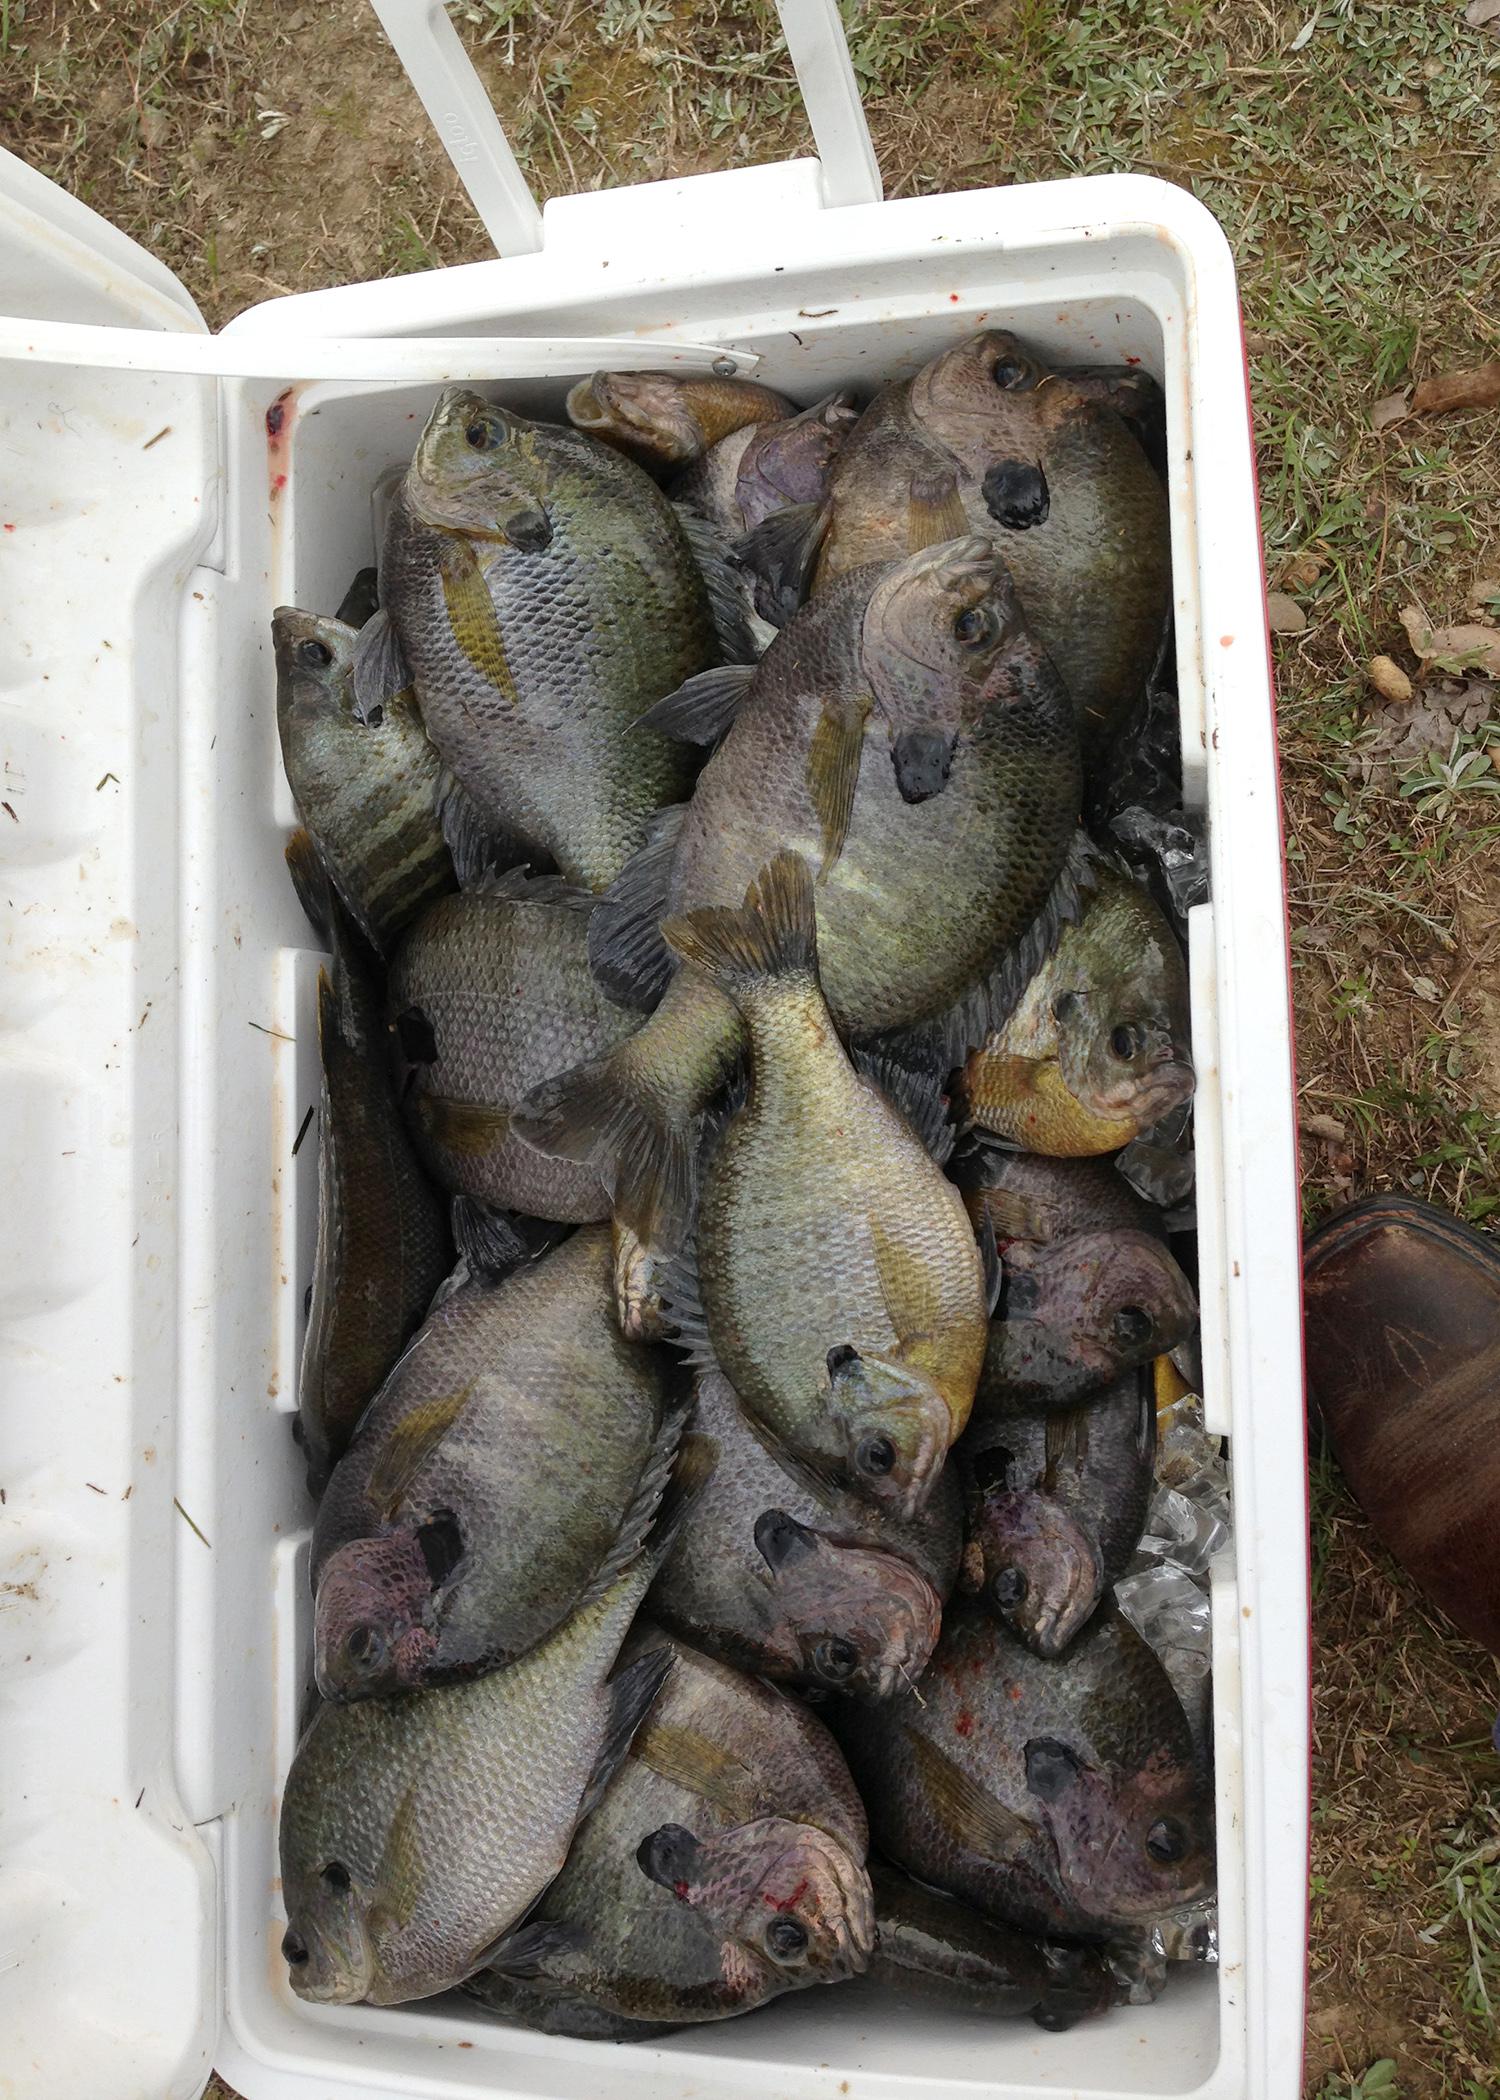 Pond owners may want to consider using fertilization programs to increase fish production. However, discontinuing the program can lead to an unhealthy fish population. (File photo by MSU Ag Communications)